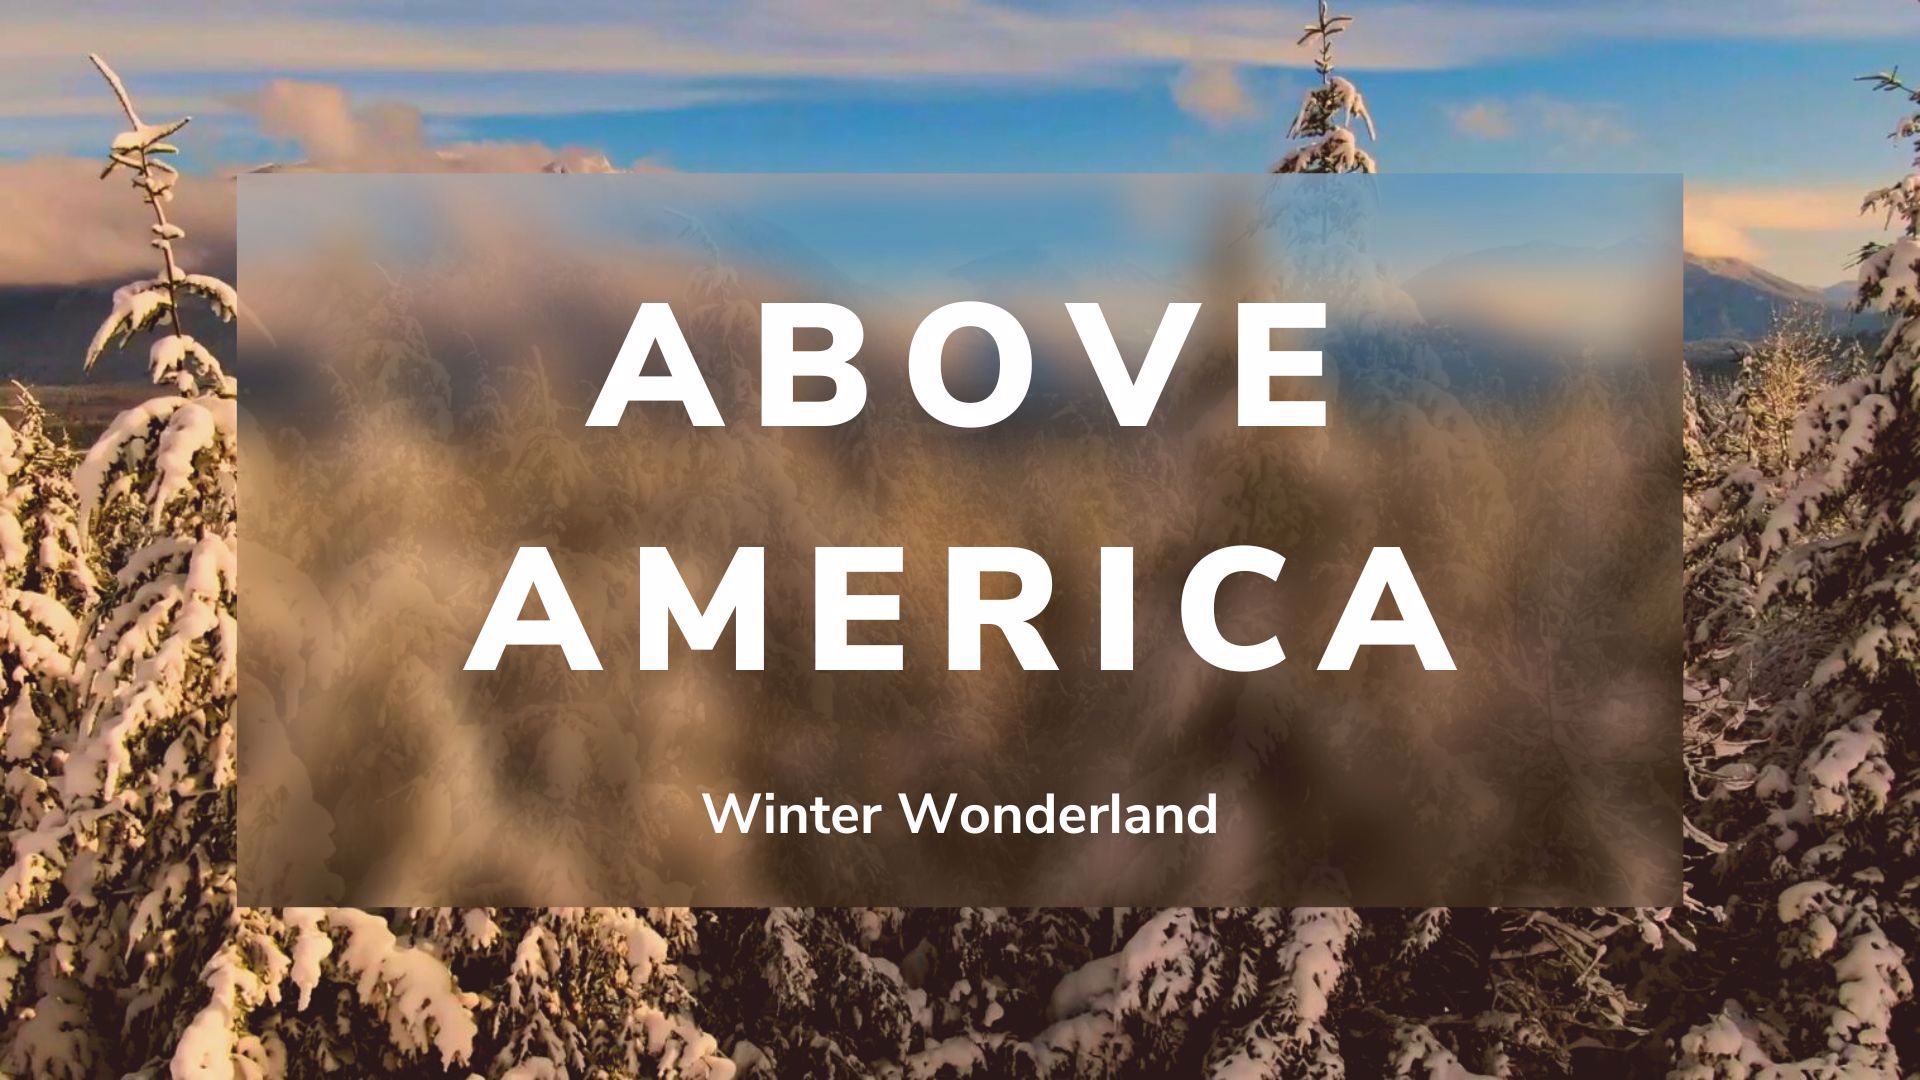 A snowy view of places across the U.S. from a bird's eye view. Take in the winter sights from the comfort of home.